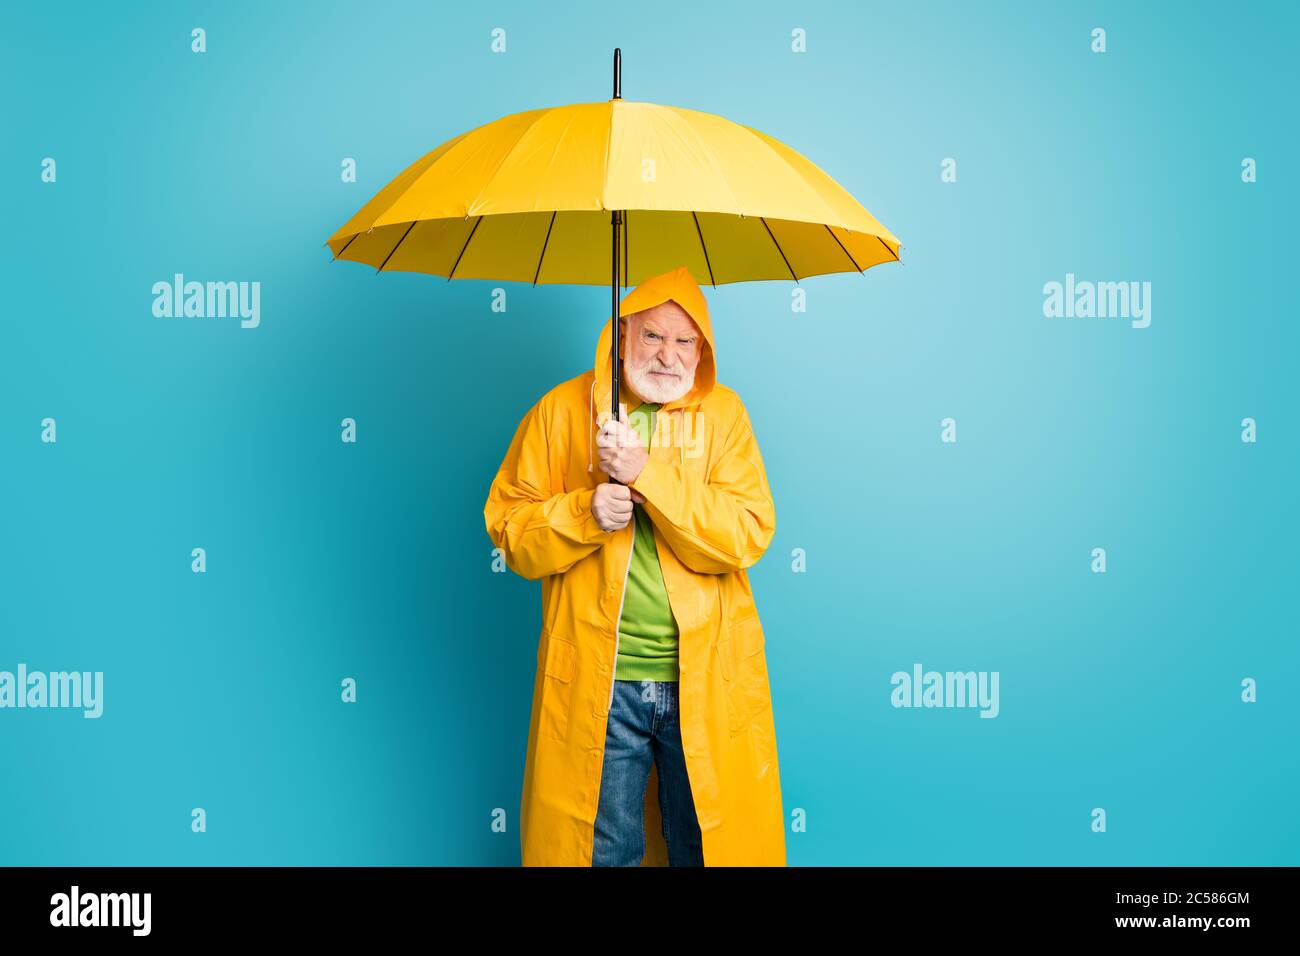 Portrait of his he dissatisfied irritated annoyed grey-haired man mushroomer wearing yellow overcoat dislike bad weather cyclone isolated over bright Stock Photo